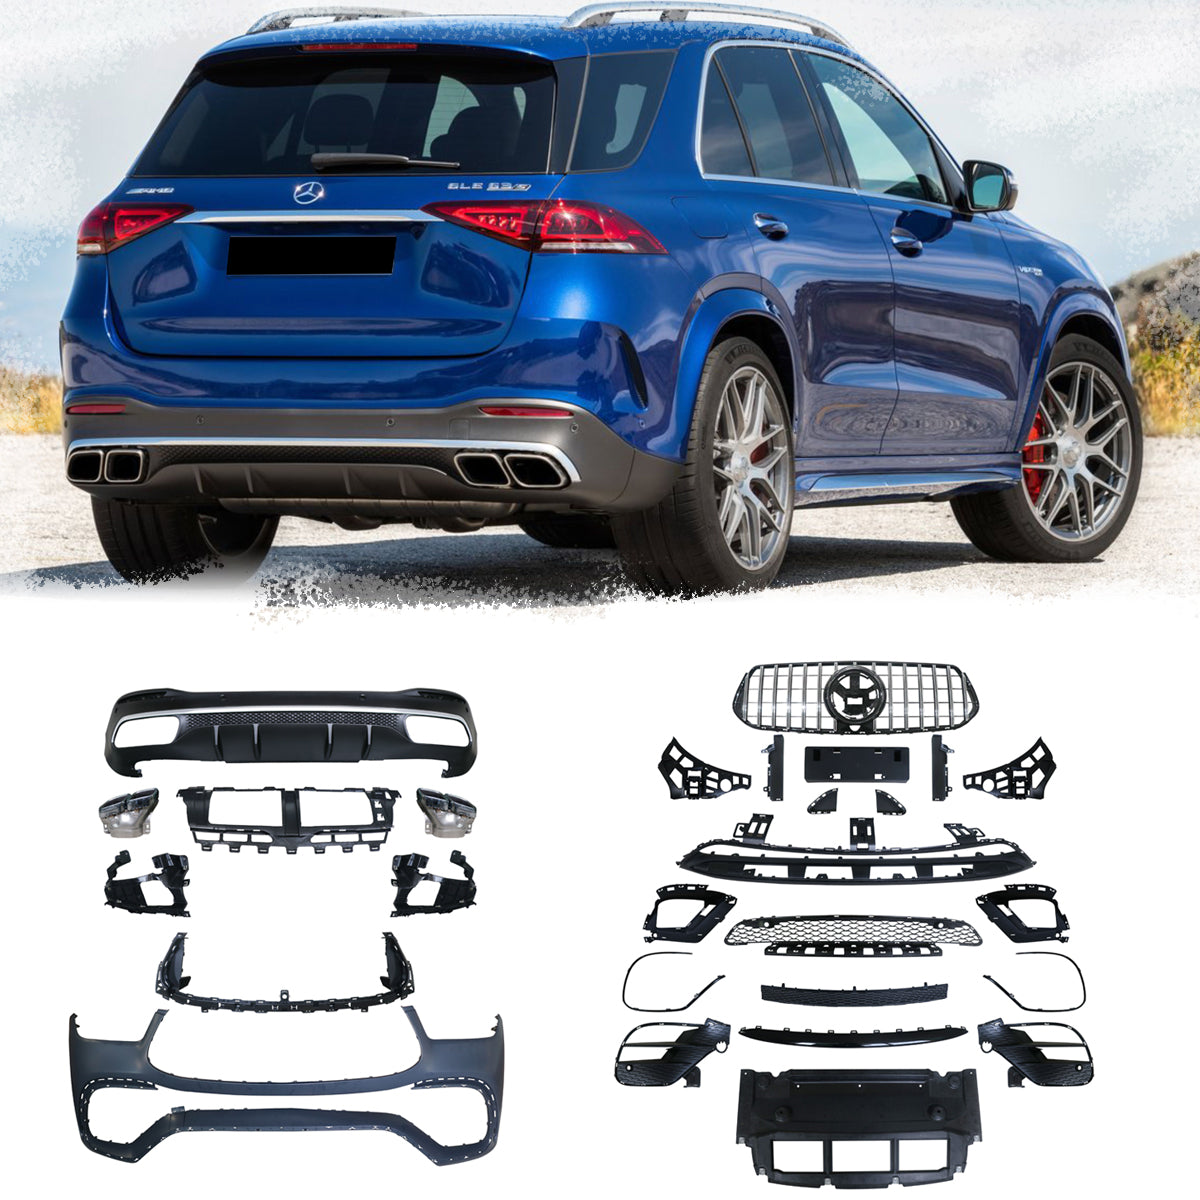 AMG STYLE BODY KIT FOR GLE-CLASS W167 2020+ UPGRADE TO GLE63